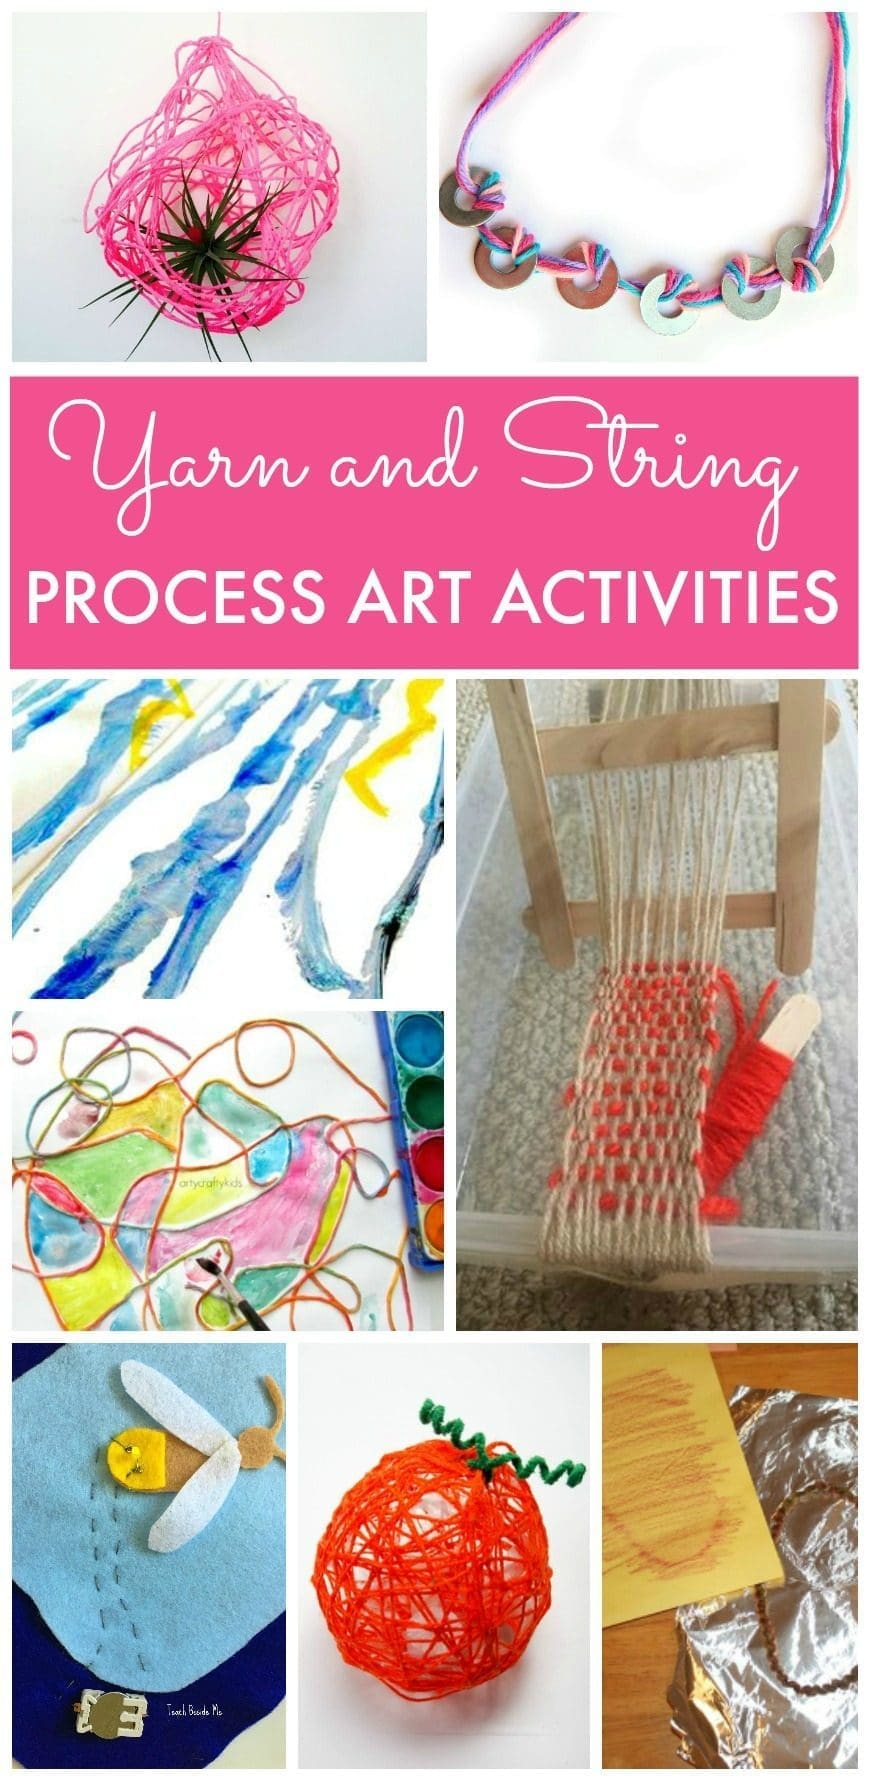 Yarn and String Process Art Activities for kids